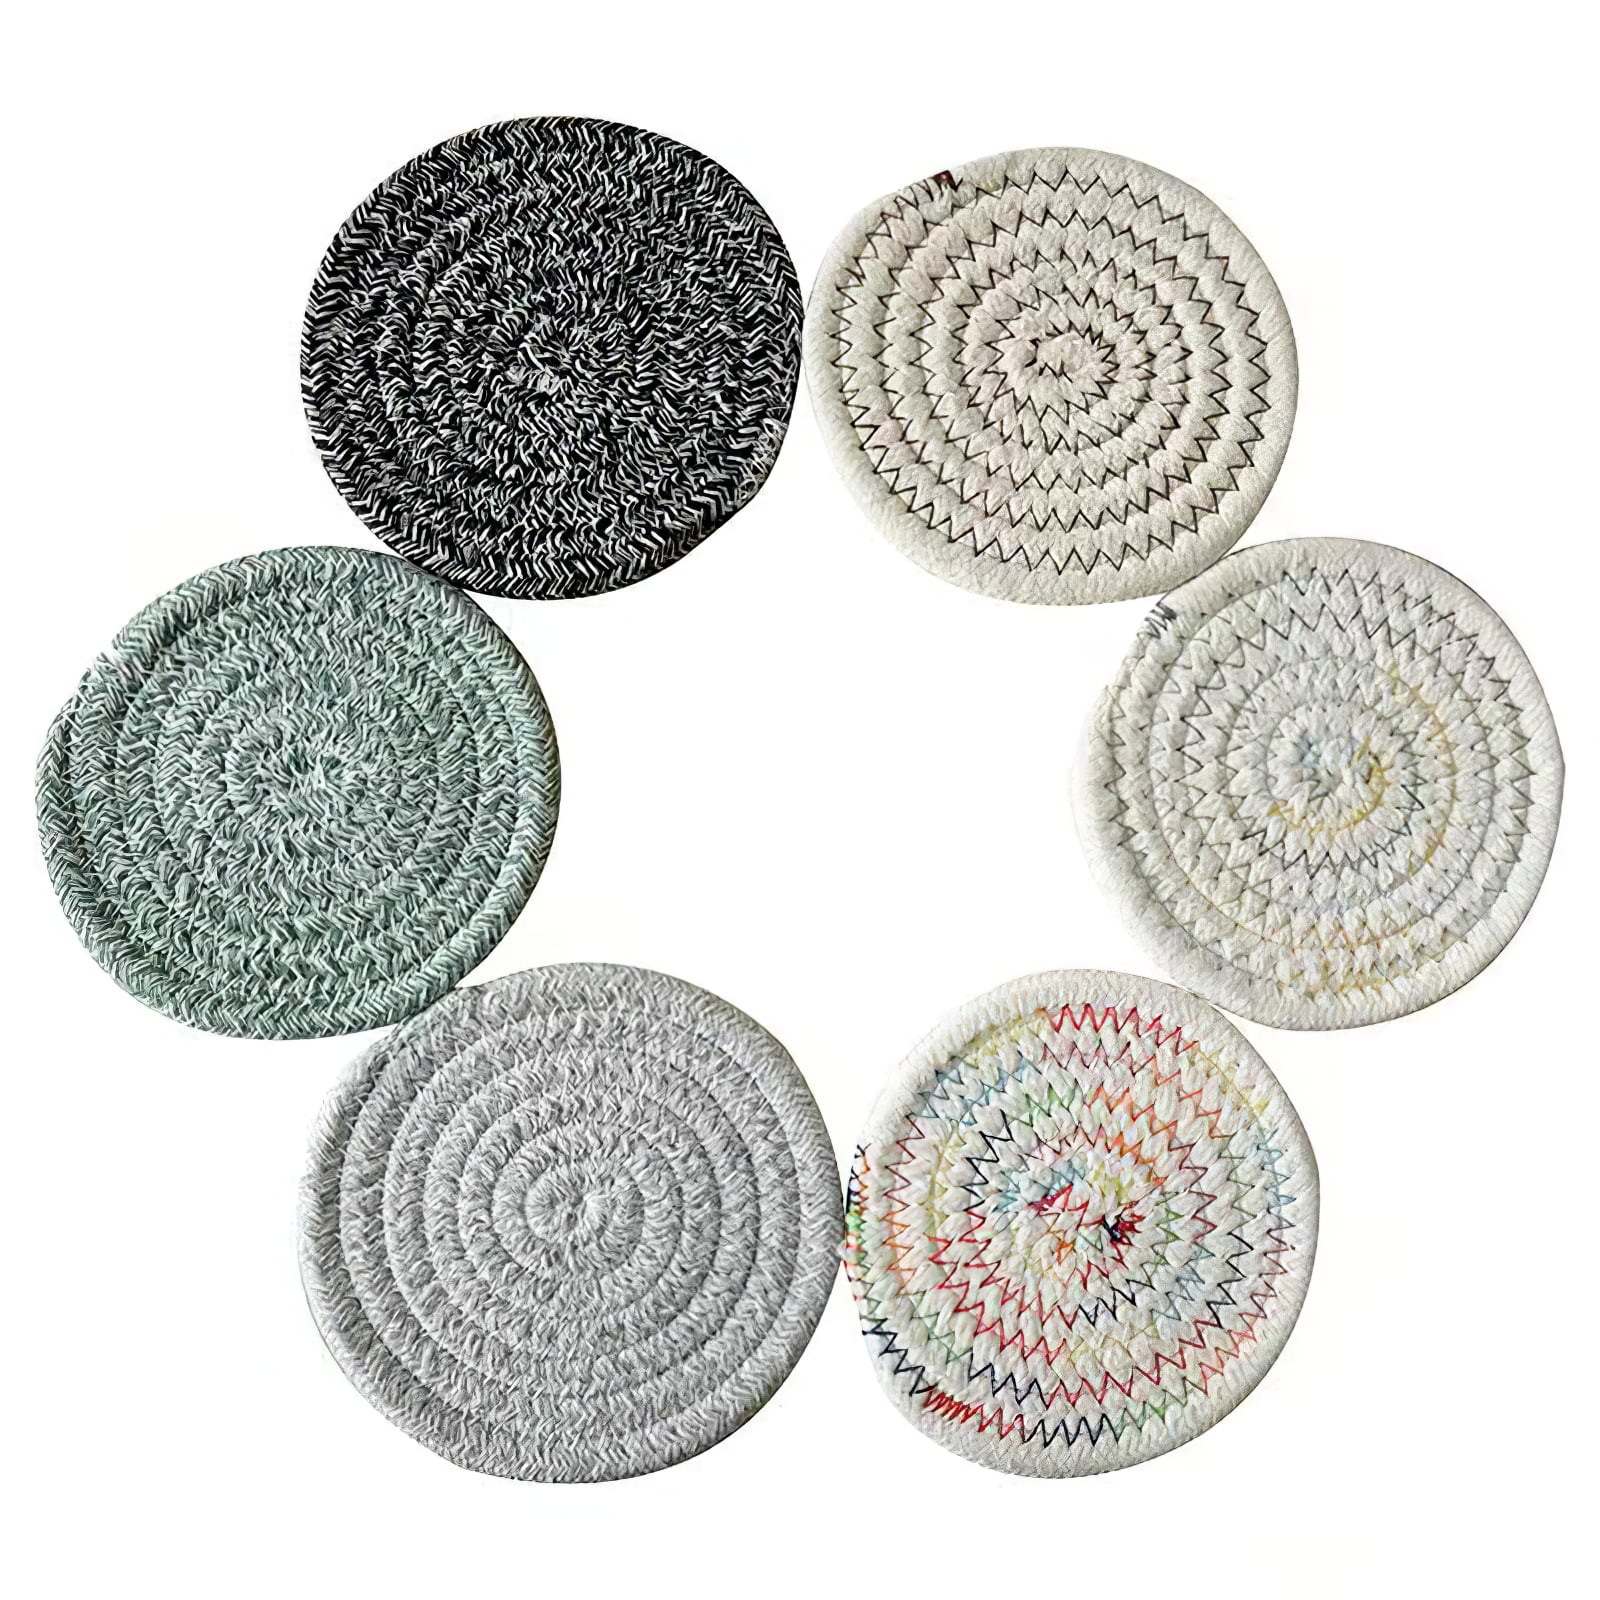 Super Absorbent Heat-Resistant Coasters for Drinks Great Housewarming Gift 4.3 Inch, Round, 8mm Thick Absorbent Drink Coasters Handmade Braided Drink Coasters 6 Pack 